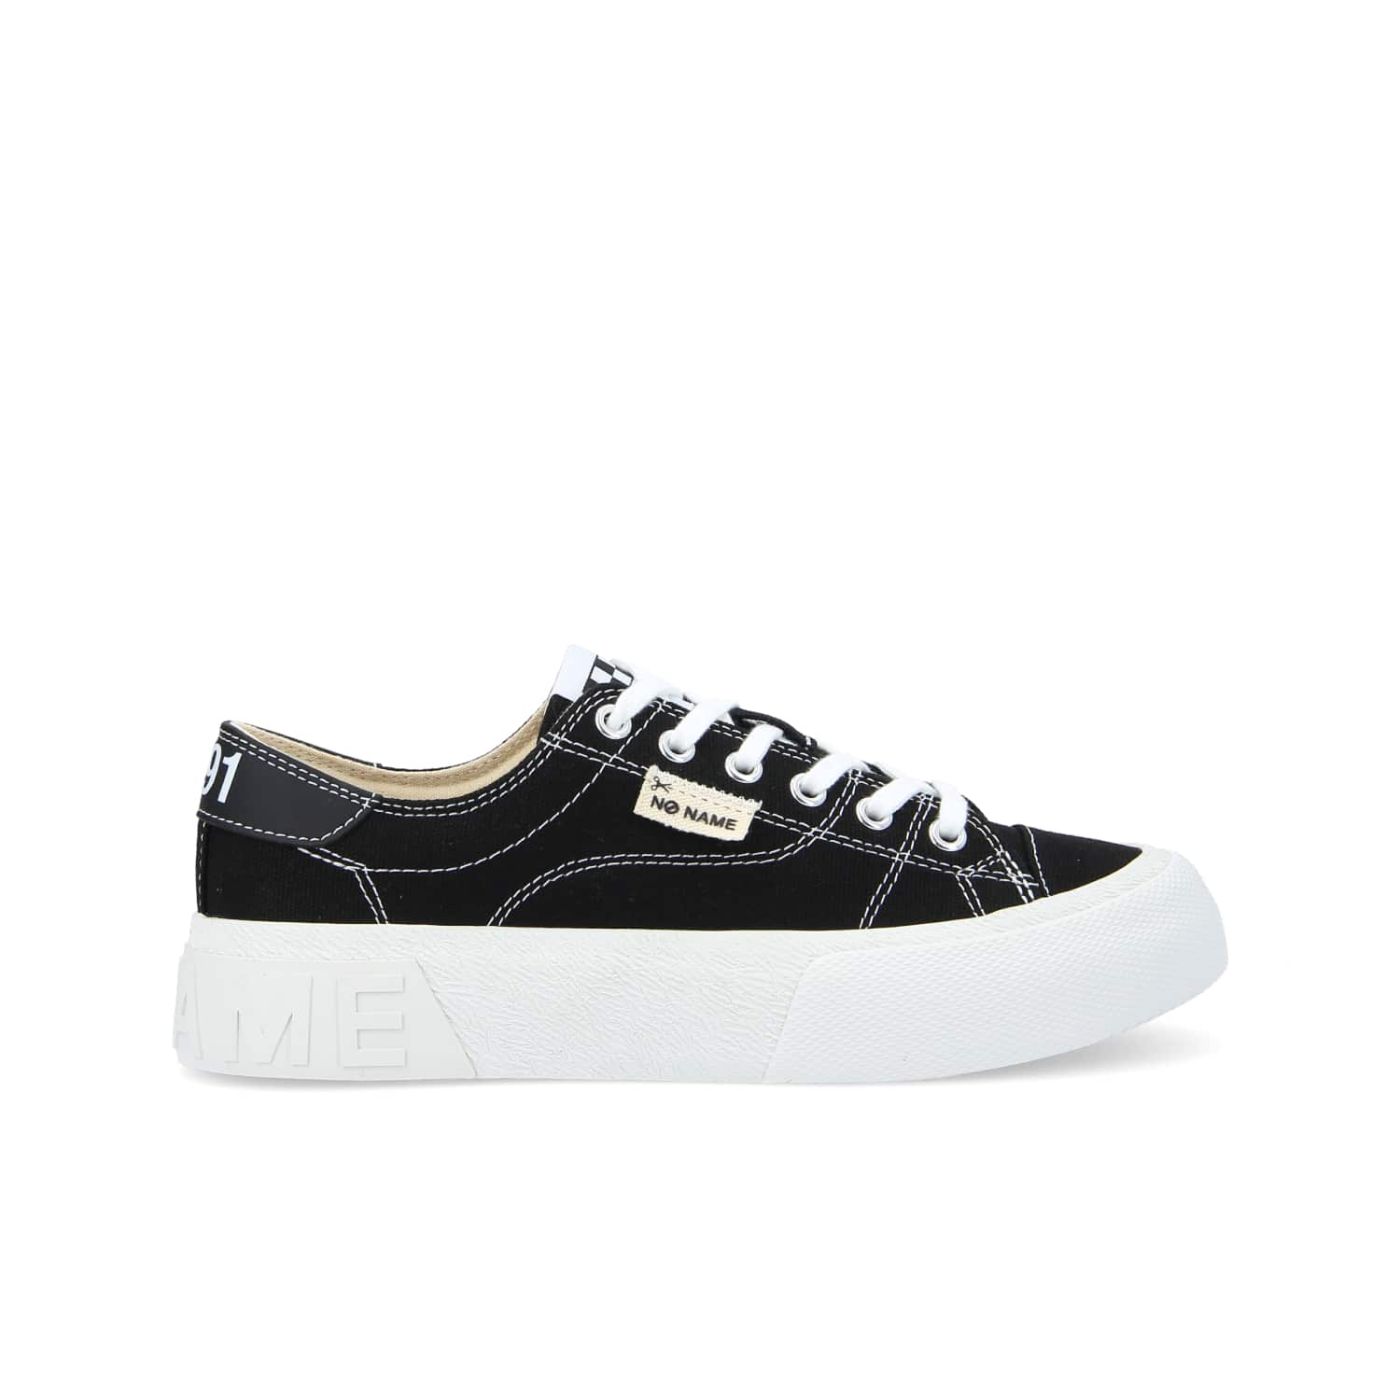 RESET SNEAKER W - CANVAS RECYCLED - BLACK/STITCH WHITE